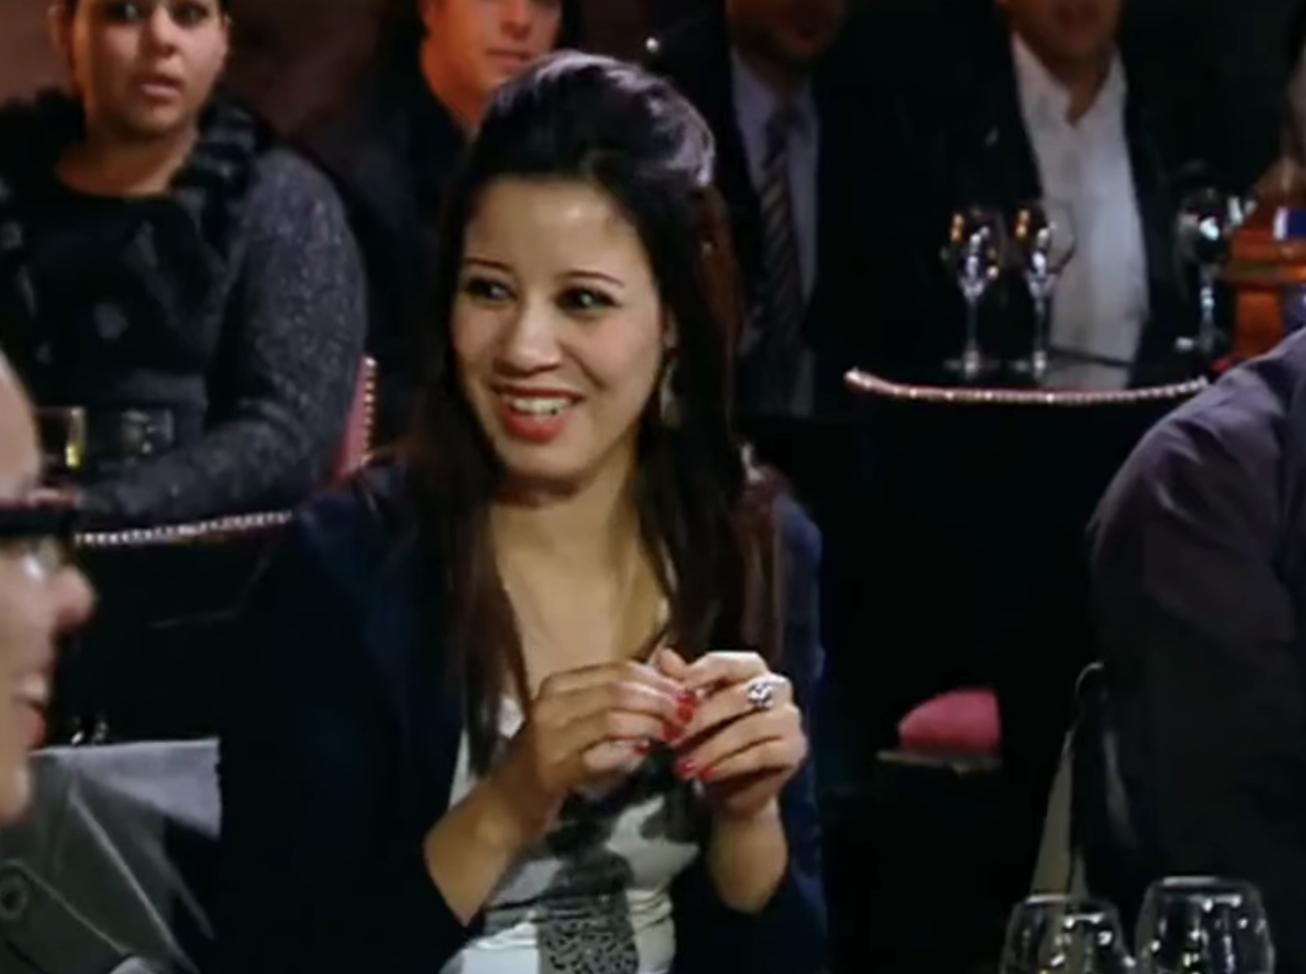 A woman laughs after a contestant trips